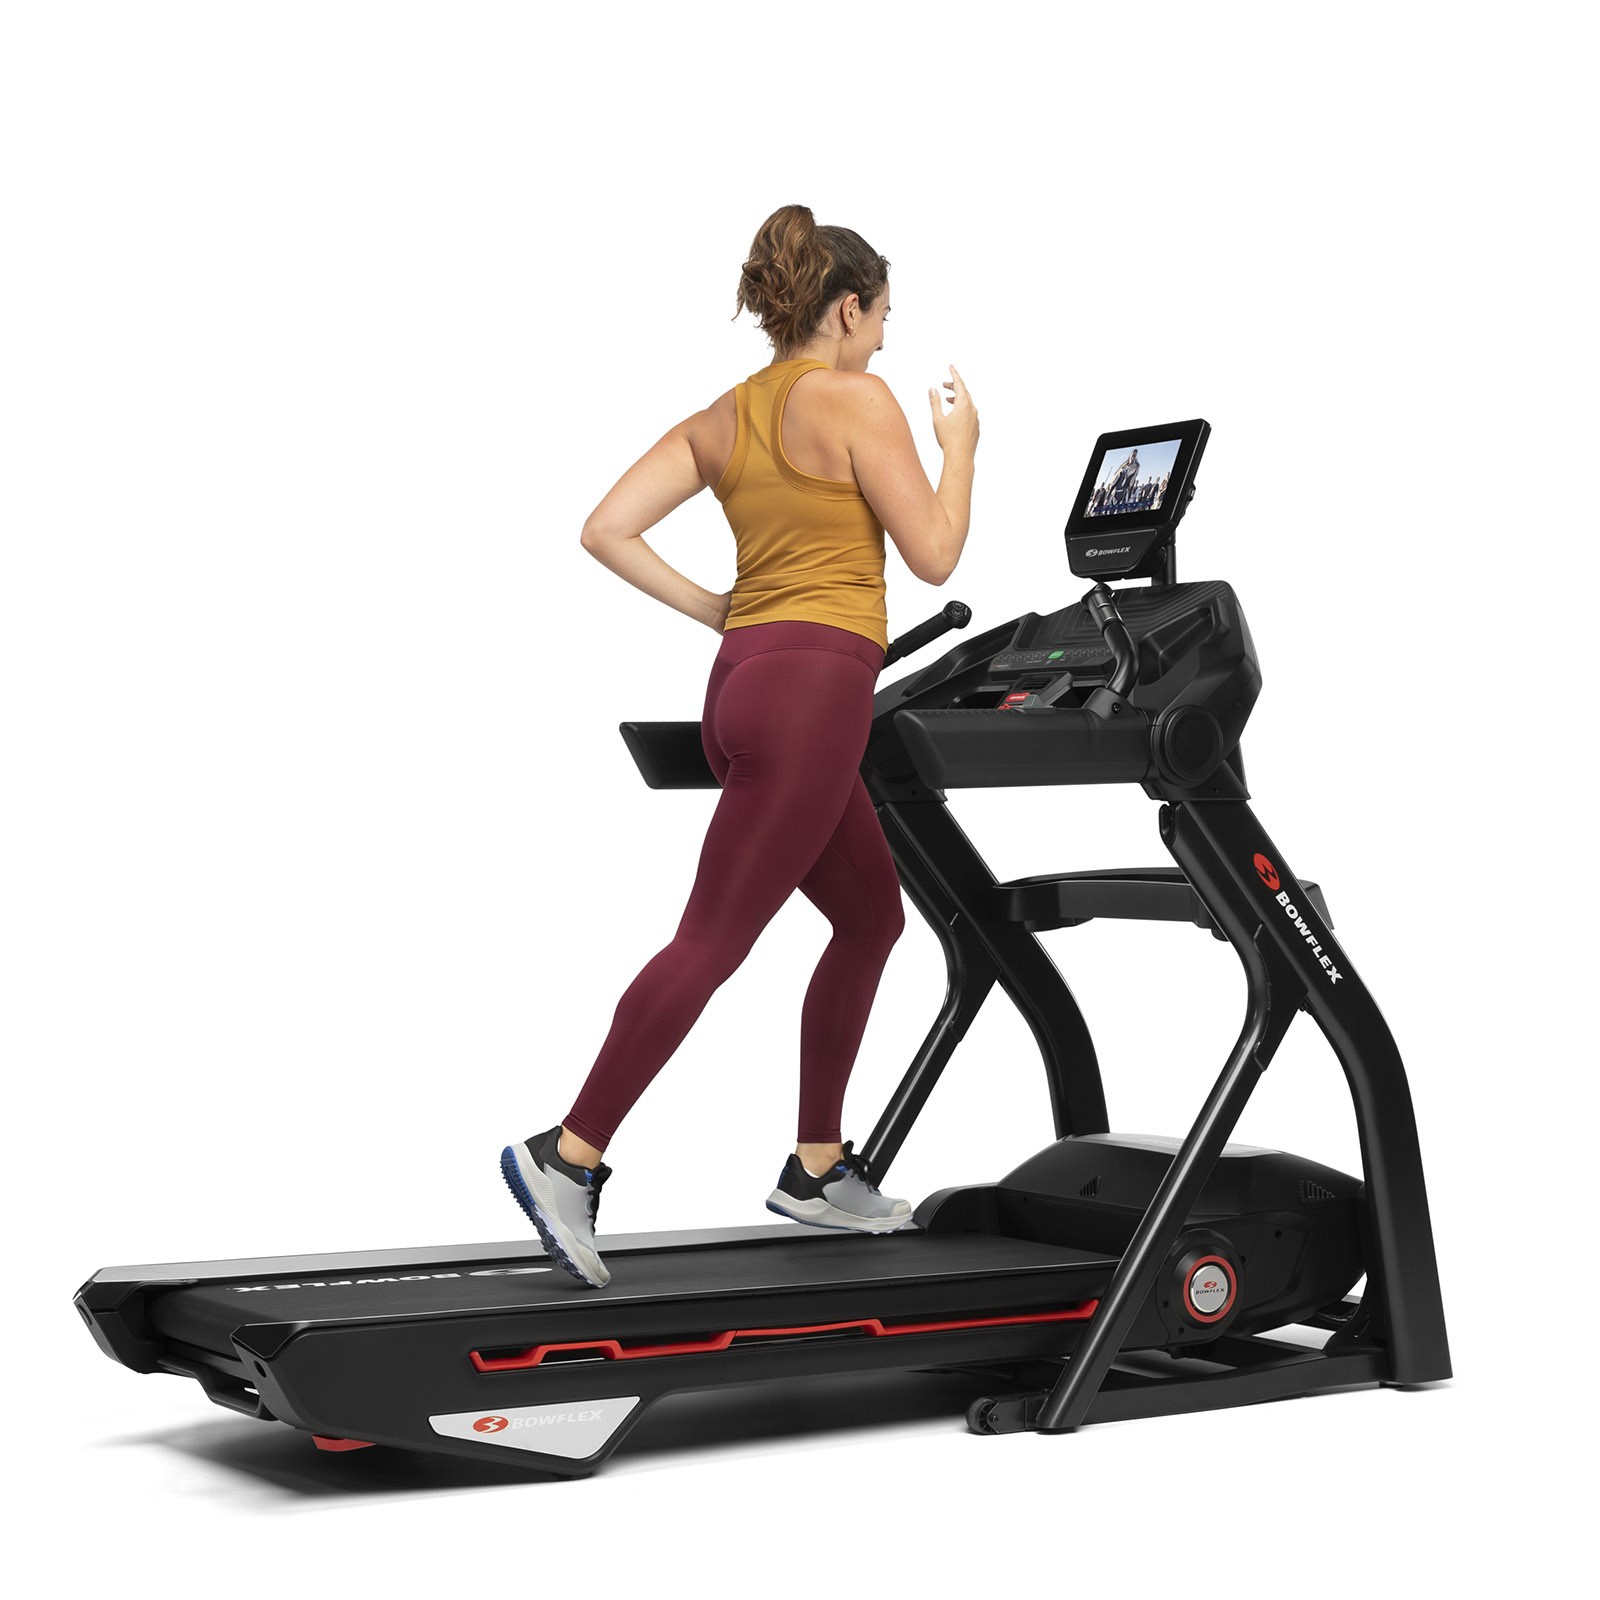 Bowflex Treadmill 25 in use with JRNY